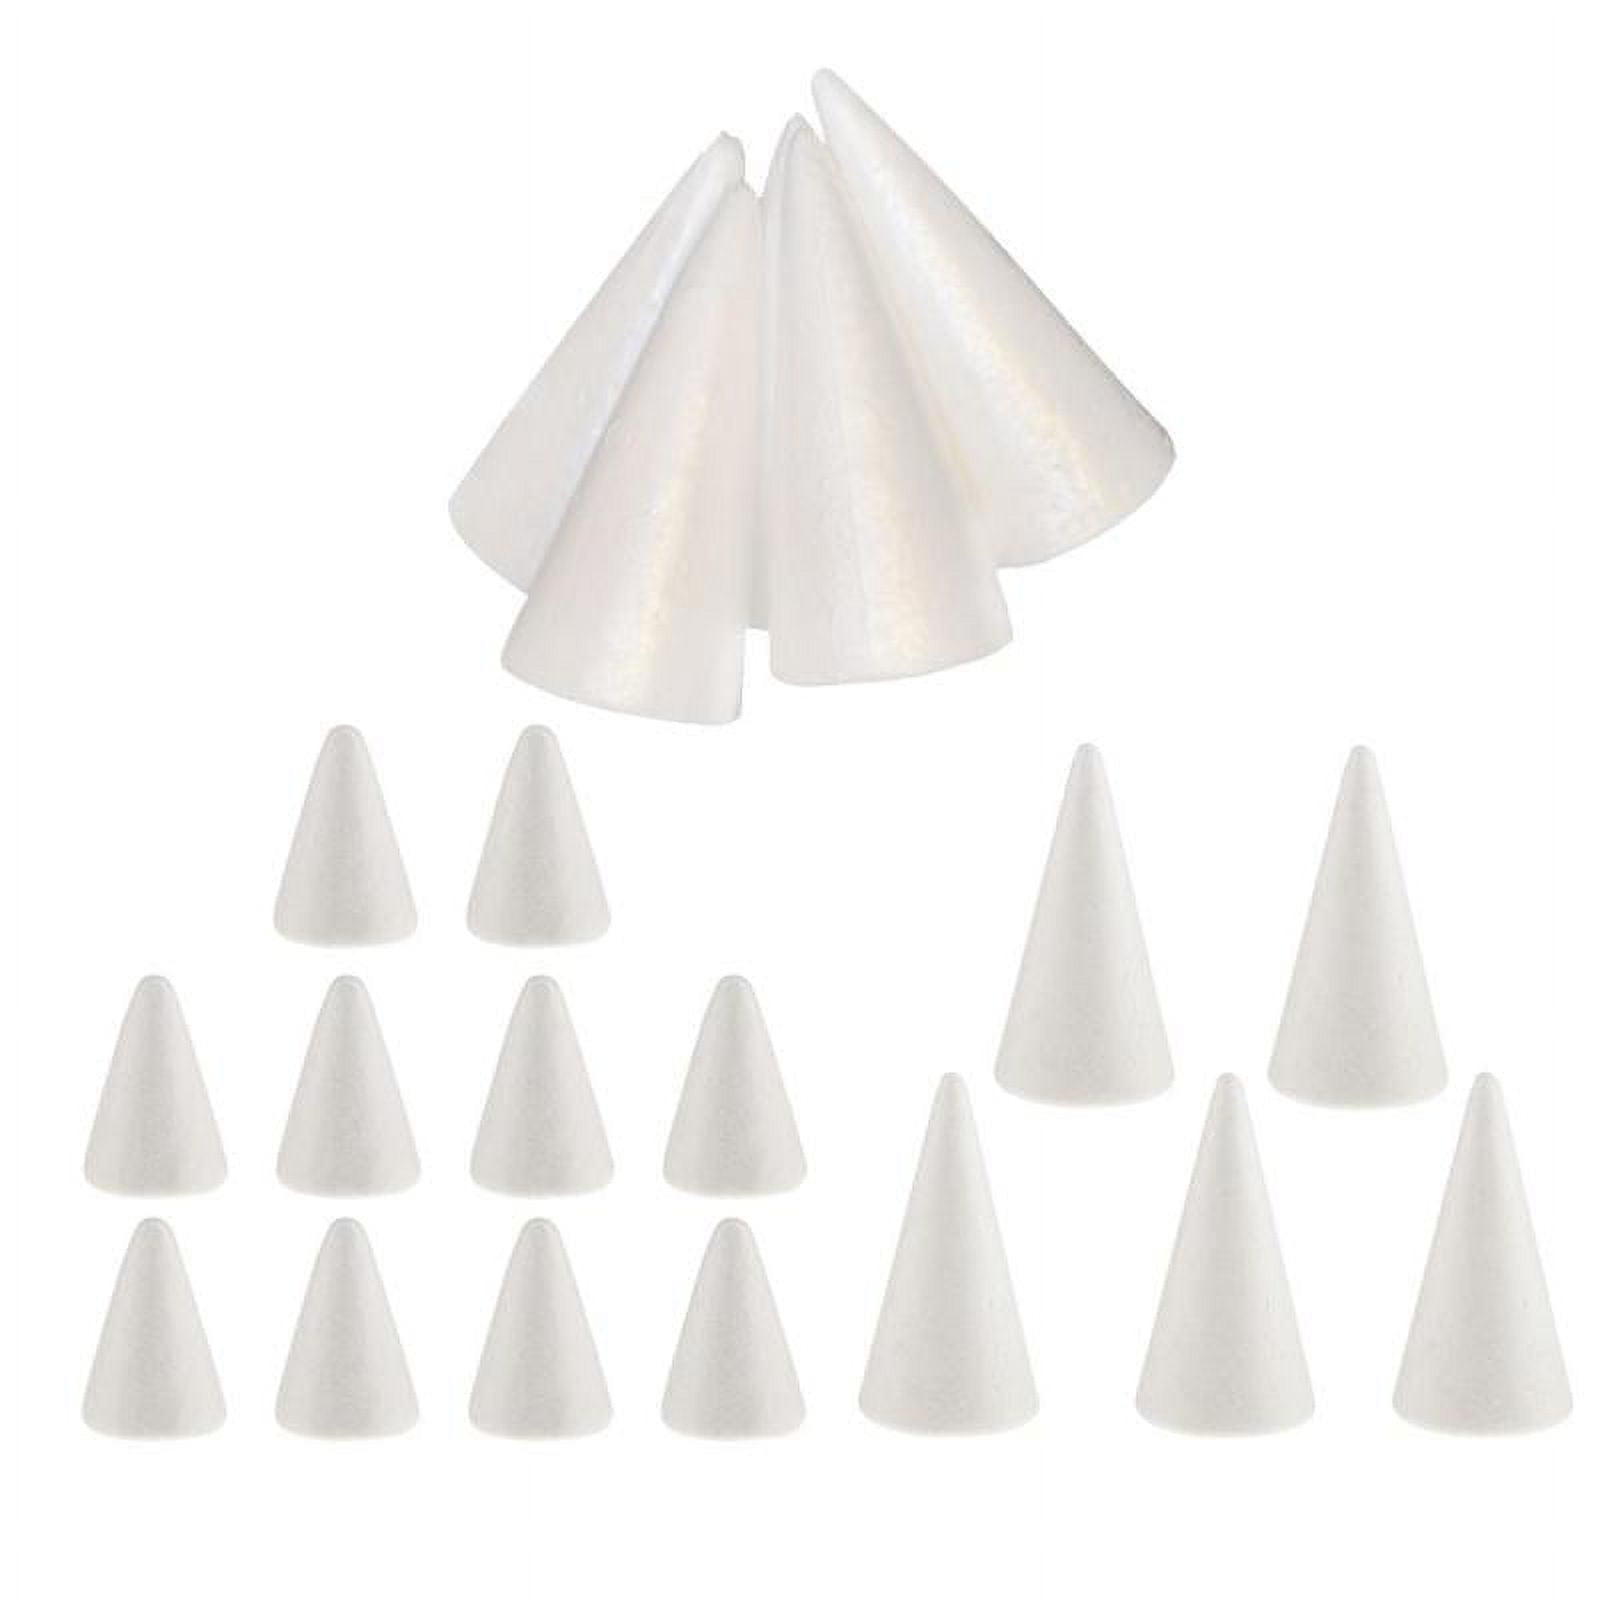 #N/A 20 Cone-shaped Styrofoam Cones for Crafts Christmas Party Decoration